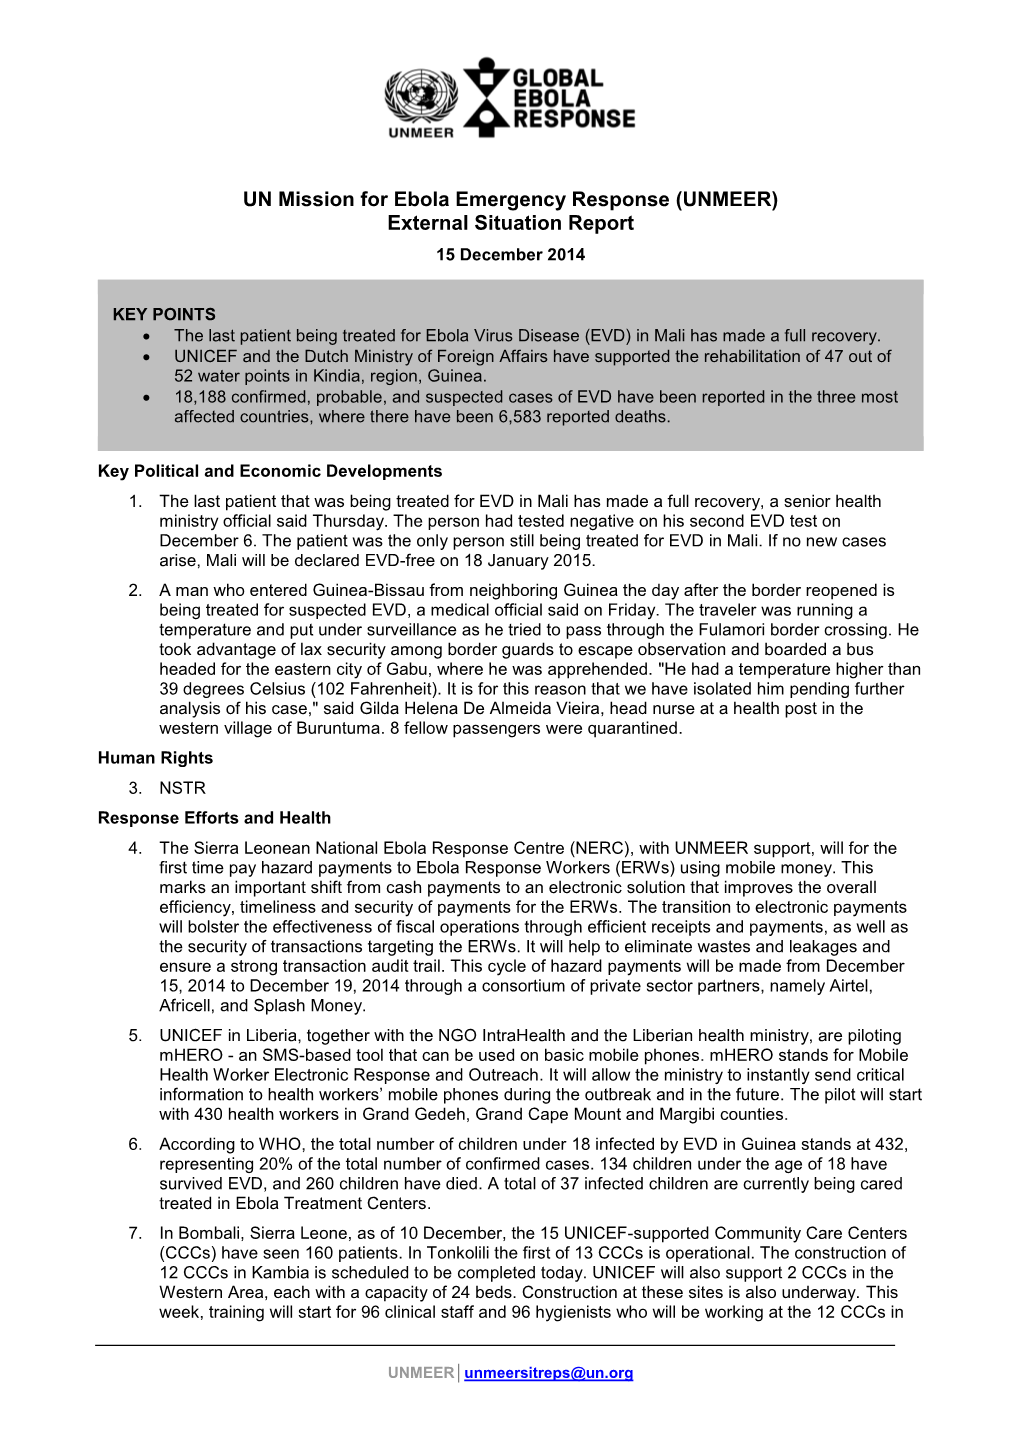 UN Mission for Ebola Emergency Response (UNMEER) External Situation Report 15 December 2014